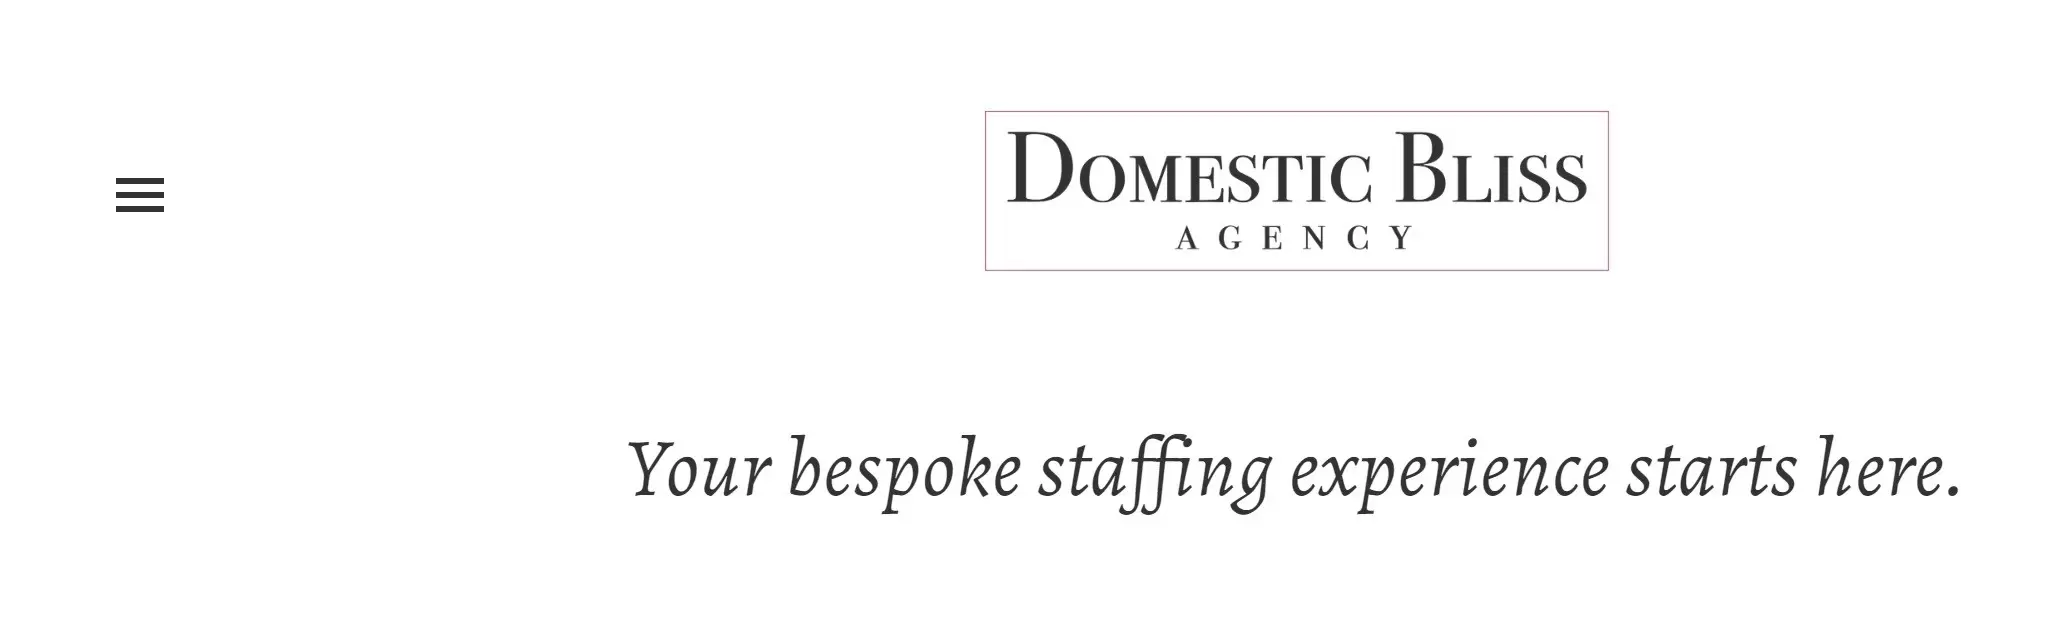 Domestic Bliss Agency company profile and reviews